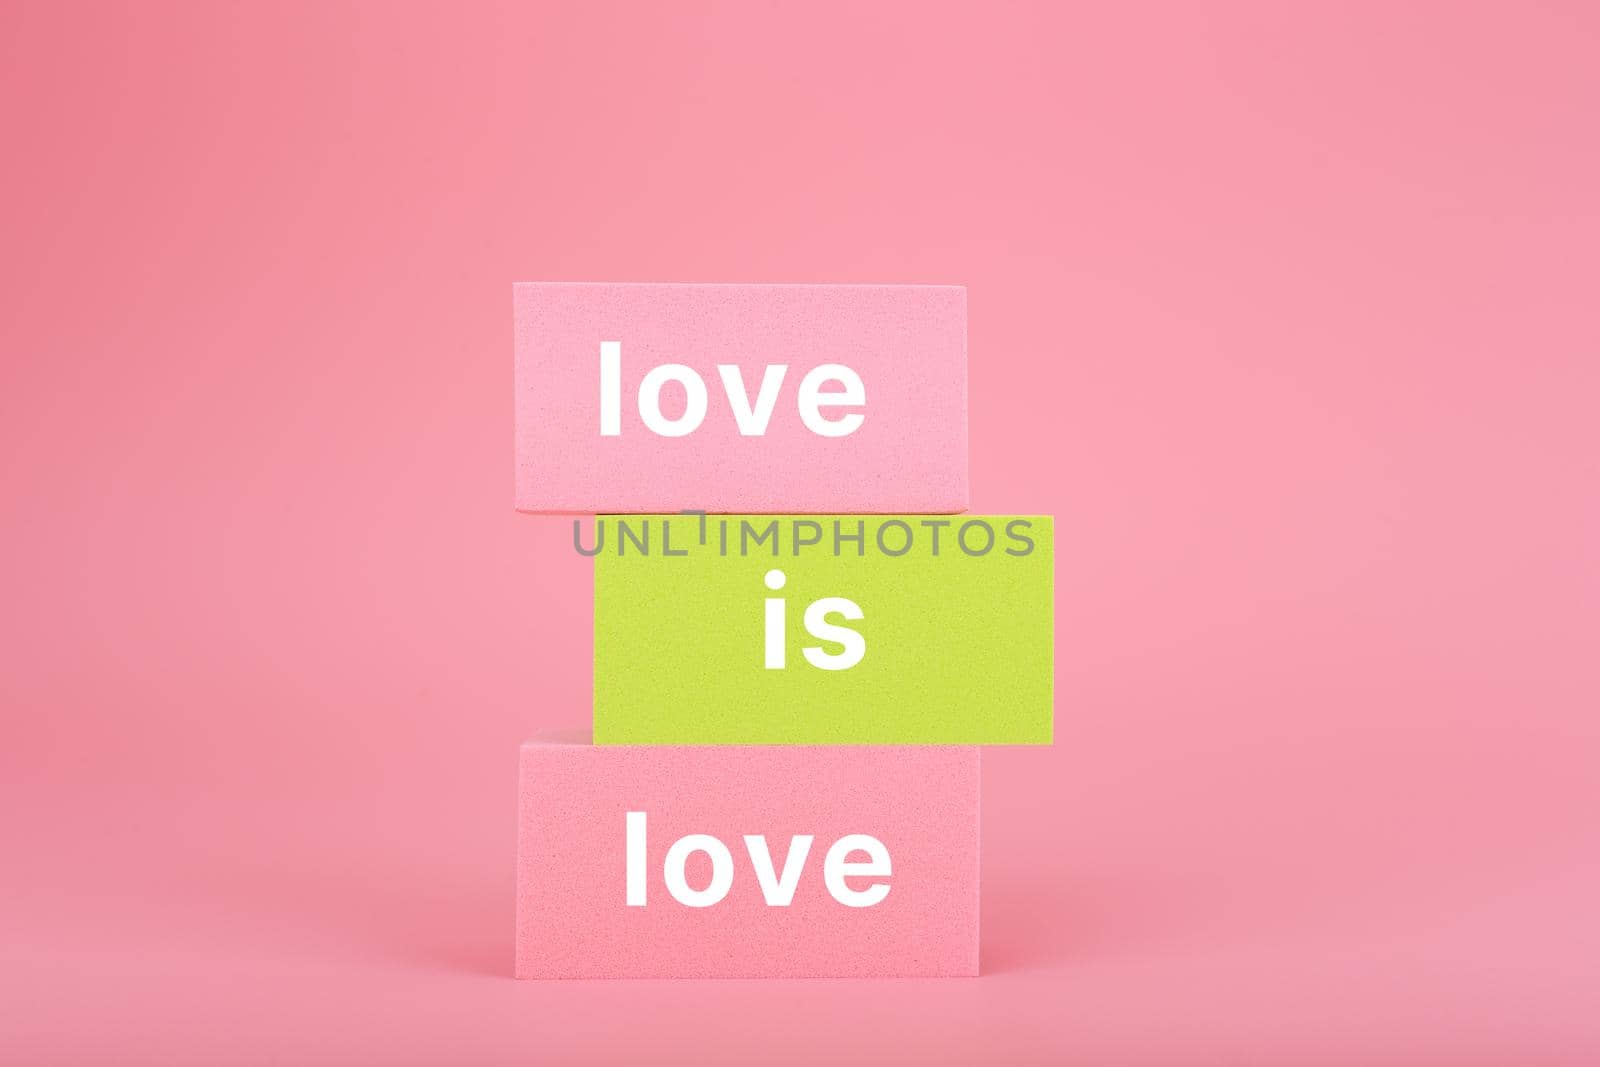 Love is love written on stack of yellow and pink rectangles on pink background. Concept of Lgbtq pride social post, tolerance, respect and equal rights